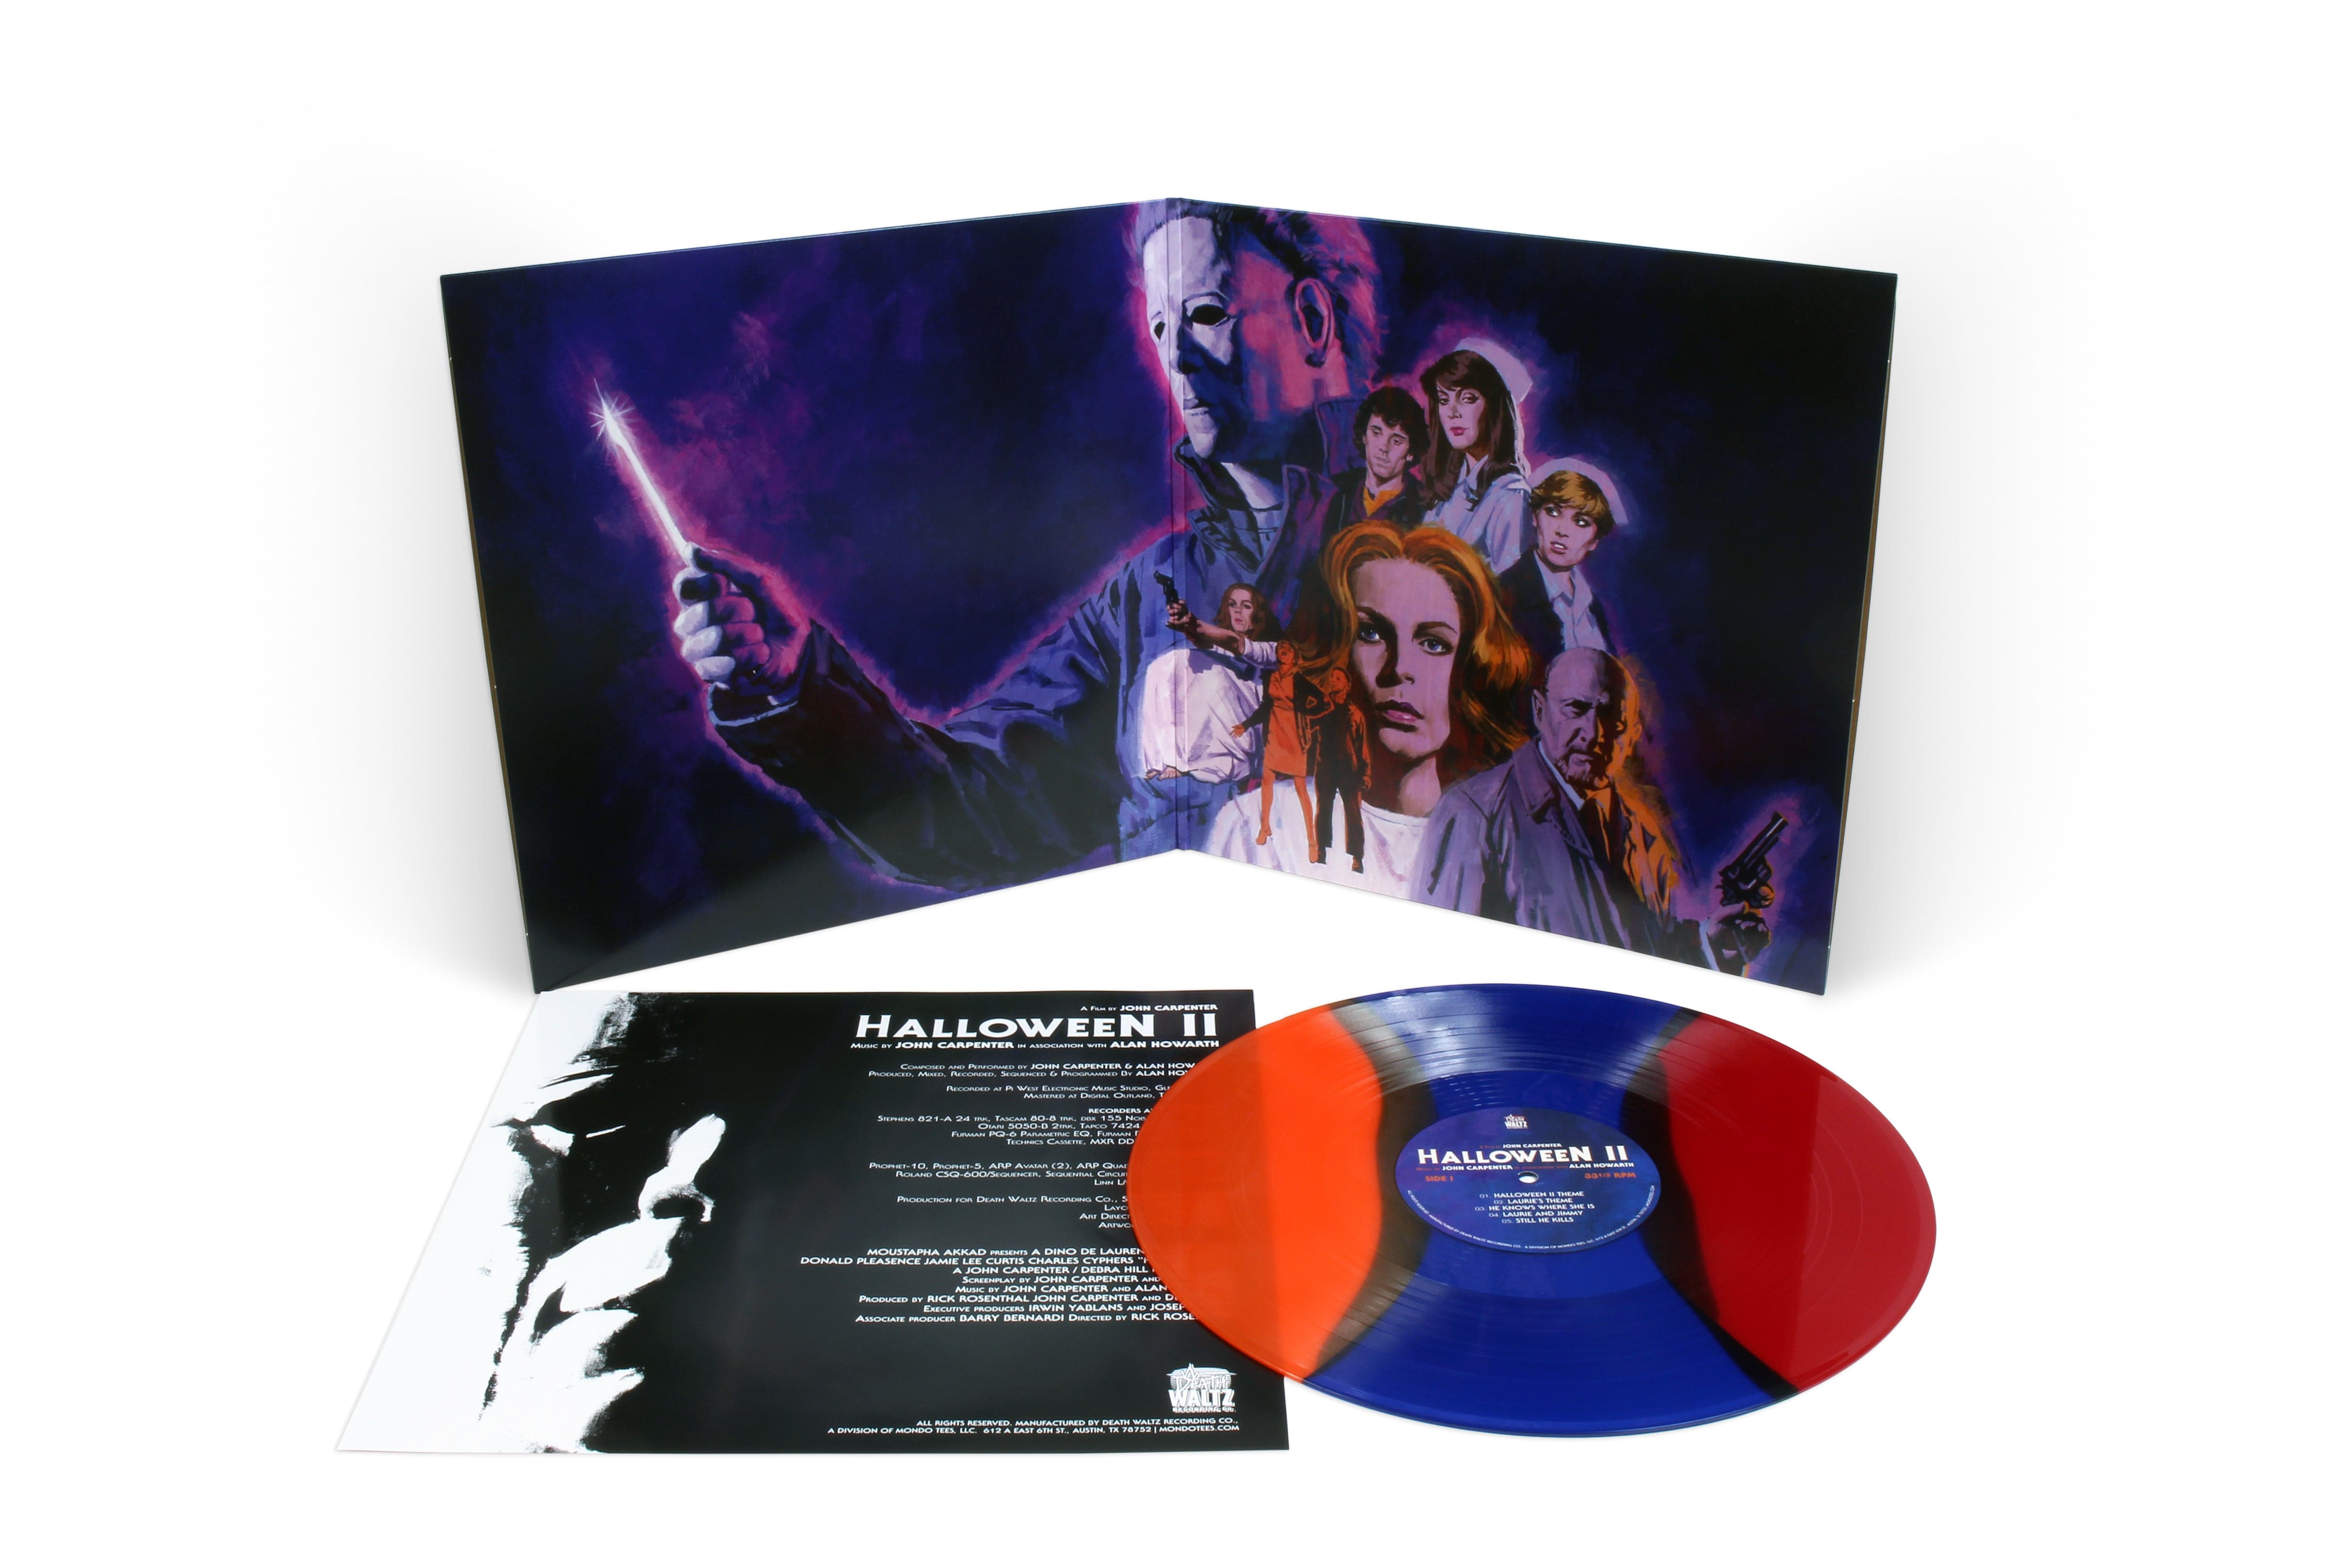 The Return of the Living Dead - Original Motion Picture Soundtrack 